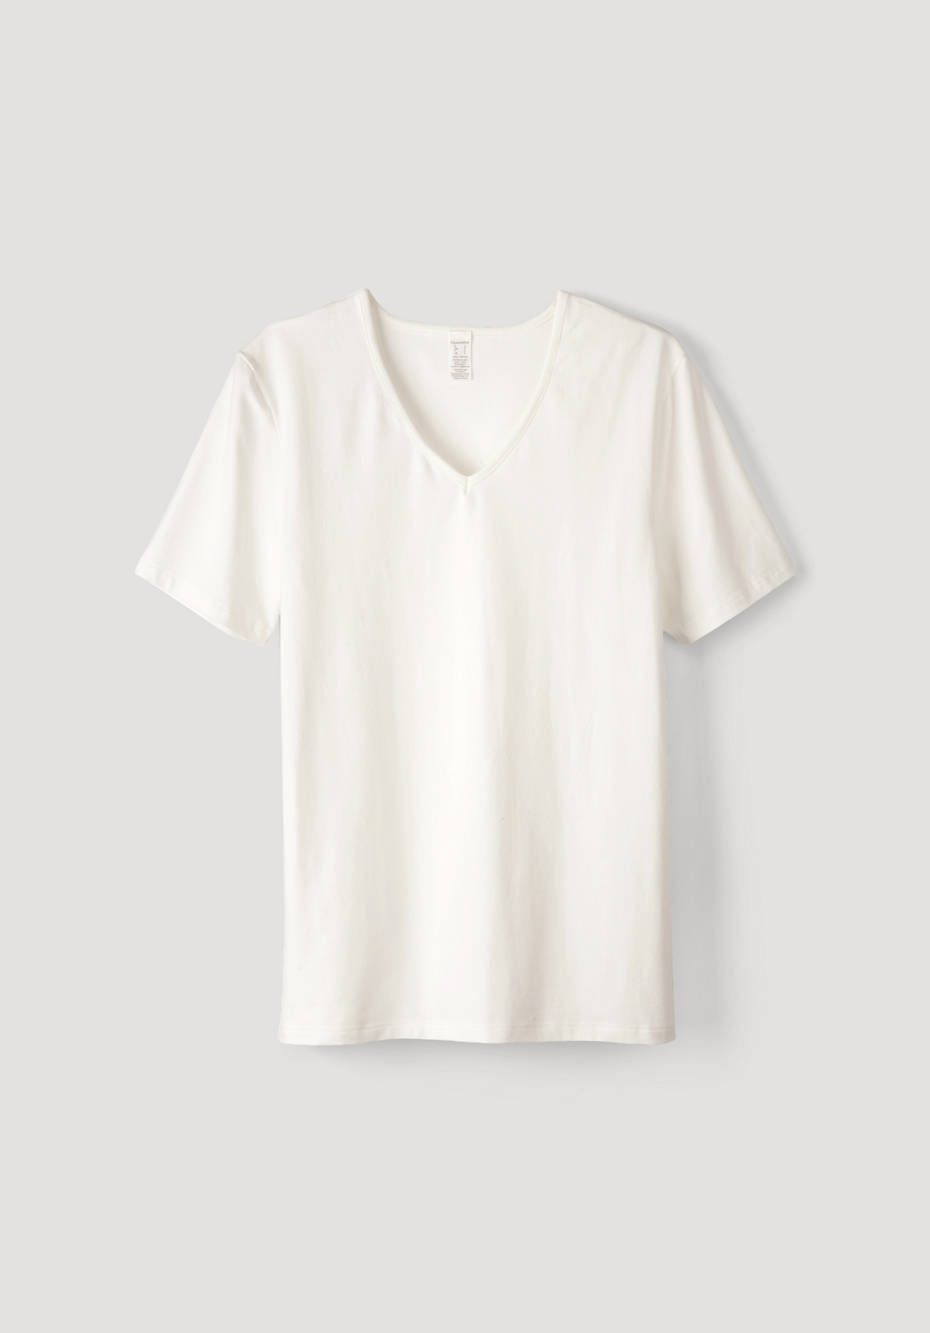 T-shirt V-neck PureLUX in a set of 2 made of organic cotton